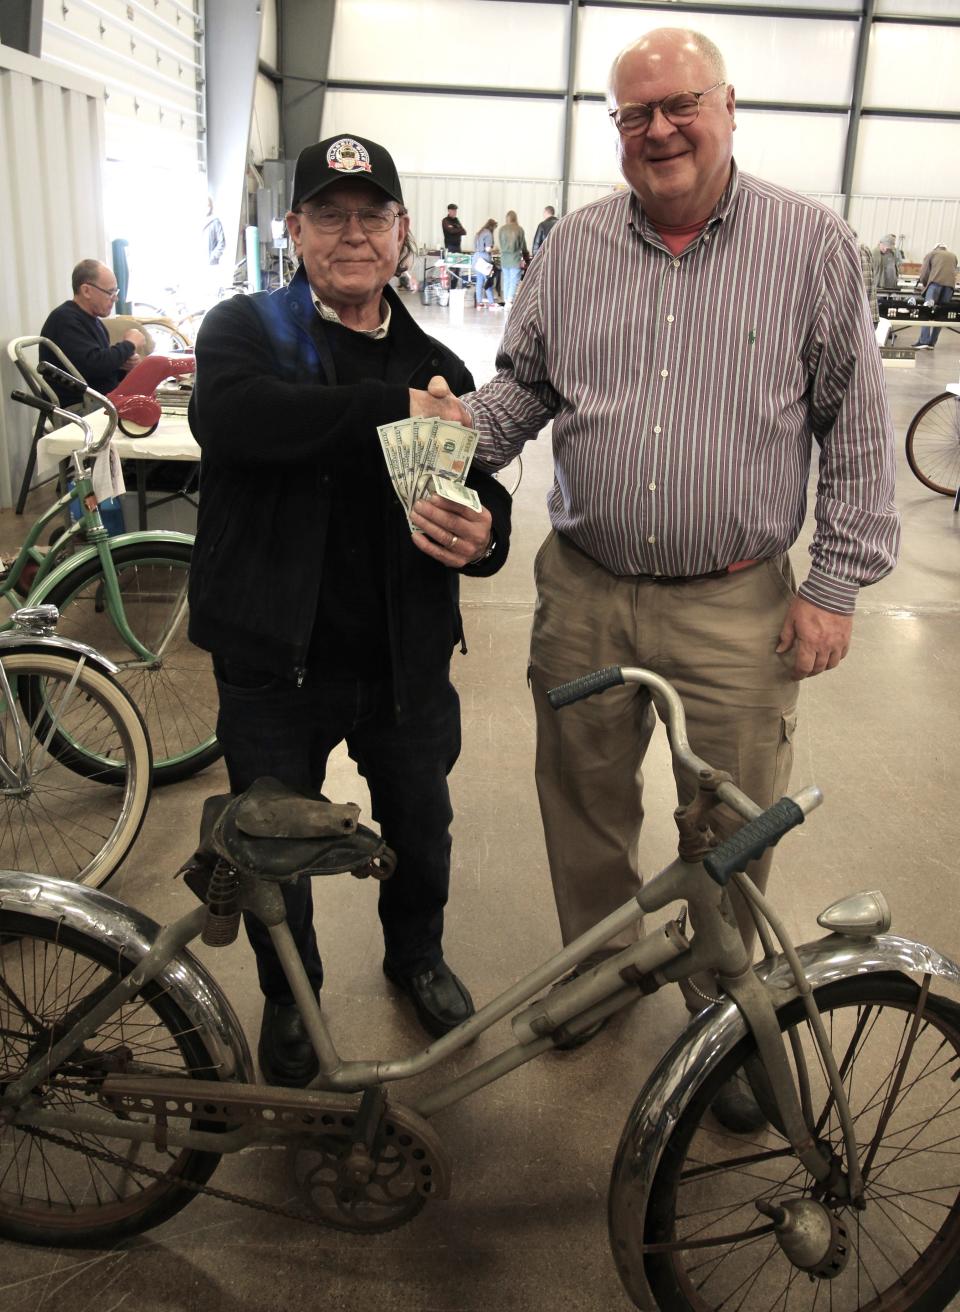 Paul Kleppert (left) congratulates Bob Snyder from Kentucky on his purchase. Snyder negotiated a “best don’t want to take it home price” on a 1935 Hawthorne Ladies Silver King. Priced at $800, Snyder took it home for $500.